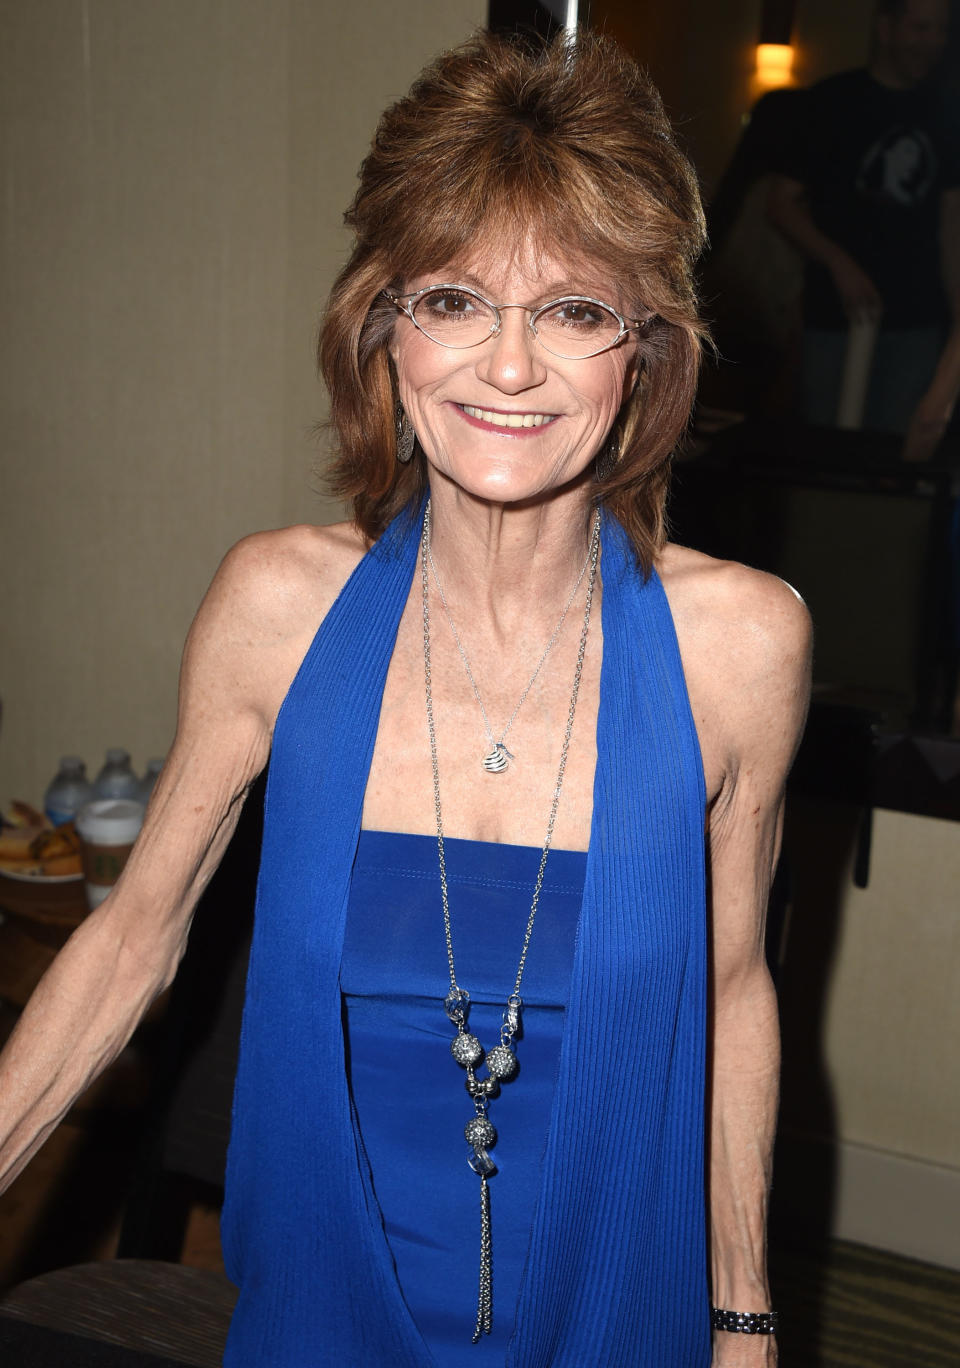 LOS ANGELES, CA - JULY 20:  Denise Nickerson Poses at The Hollywood Show - Day 2 at Westin Los Angeles Airport on July 20, 2014 in Los Angeles, California.  (Photo by Steve Granitz/WireImage)